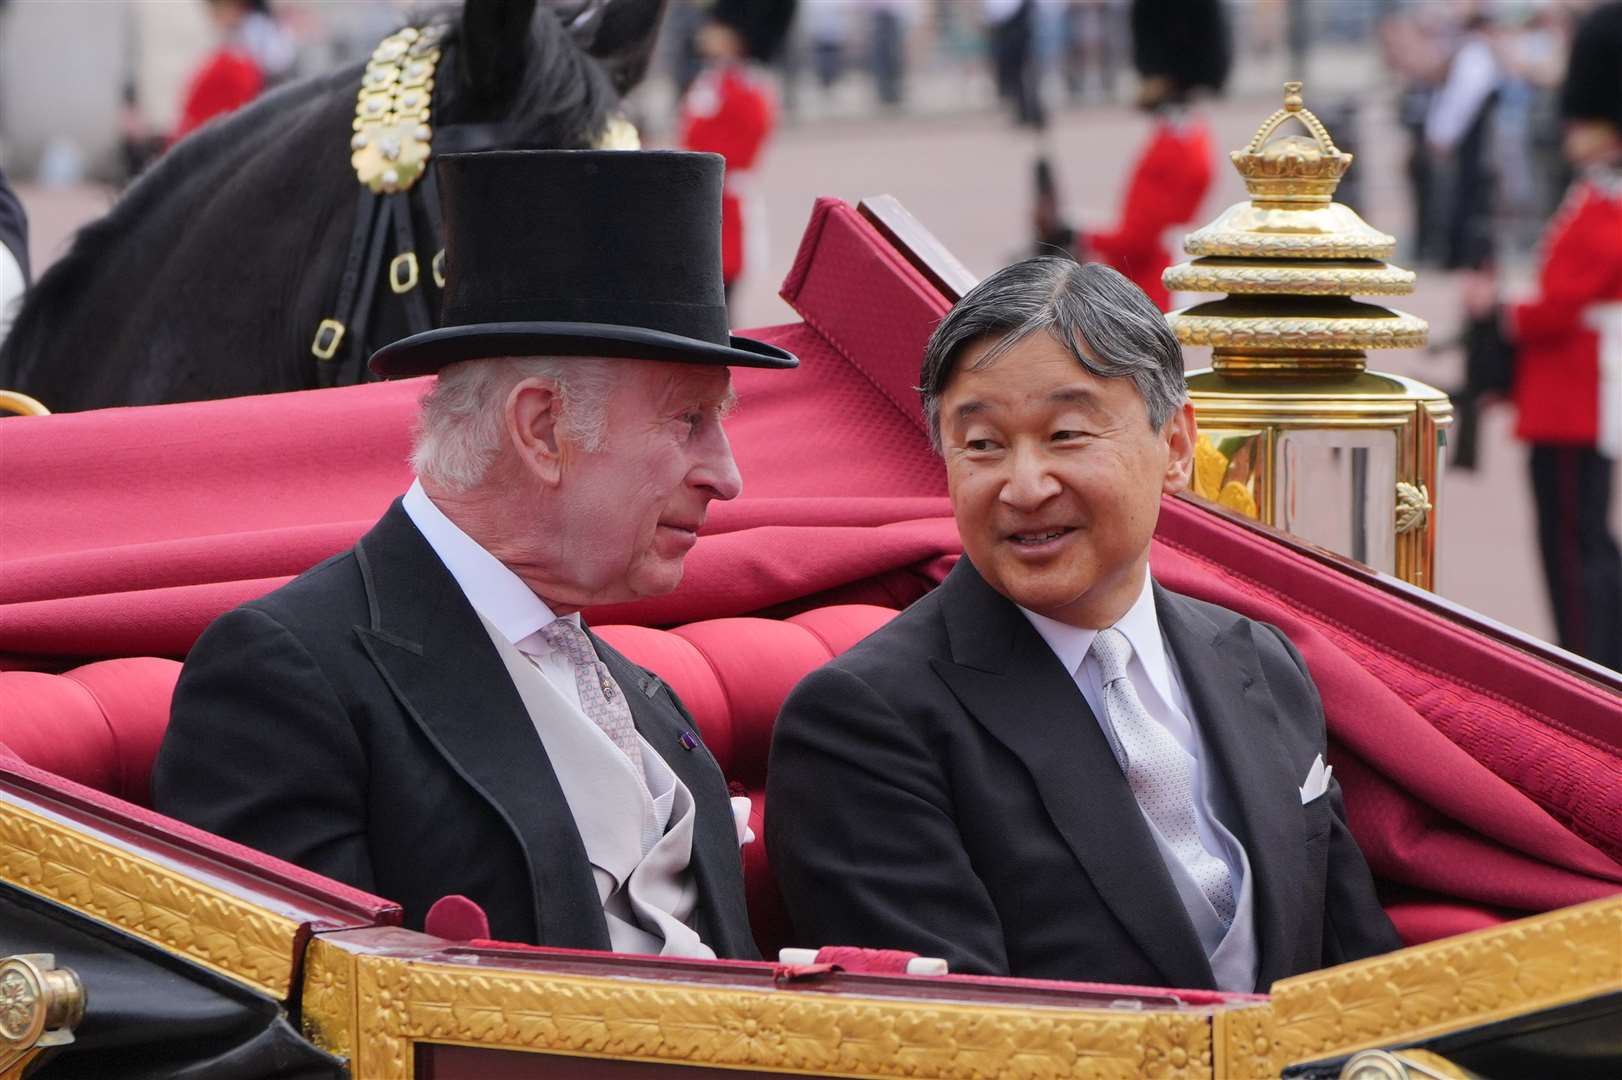 Charles and Emperor Naruhito chat as they travel in a carriage to Buckingham Palace (Jonathan Brady/PA)